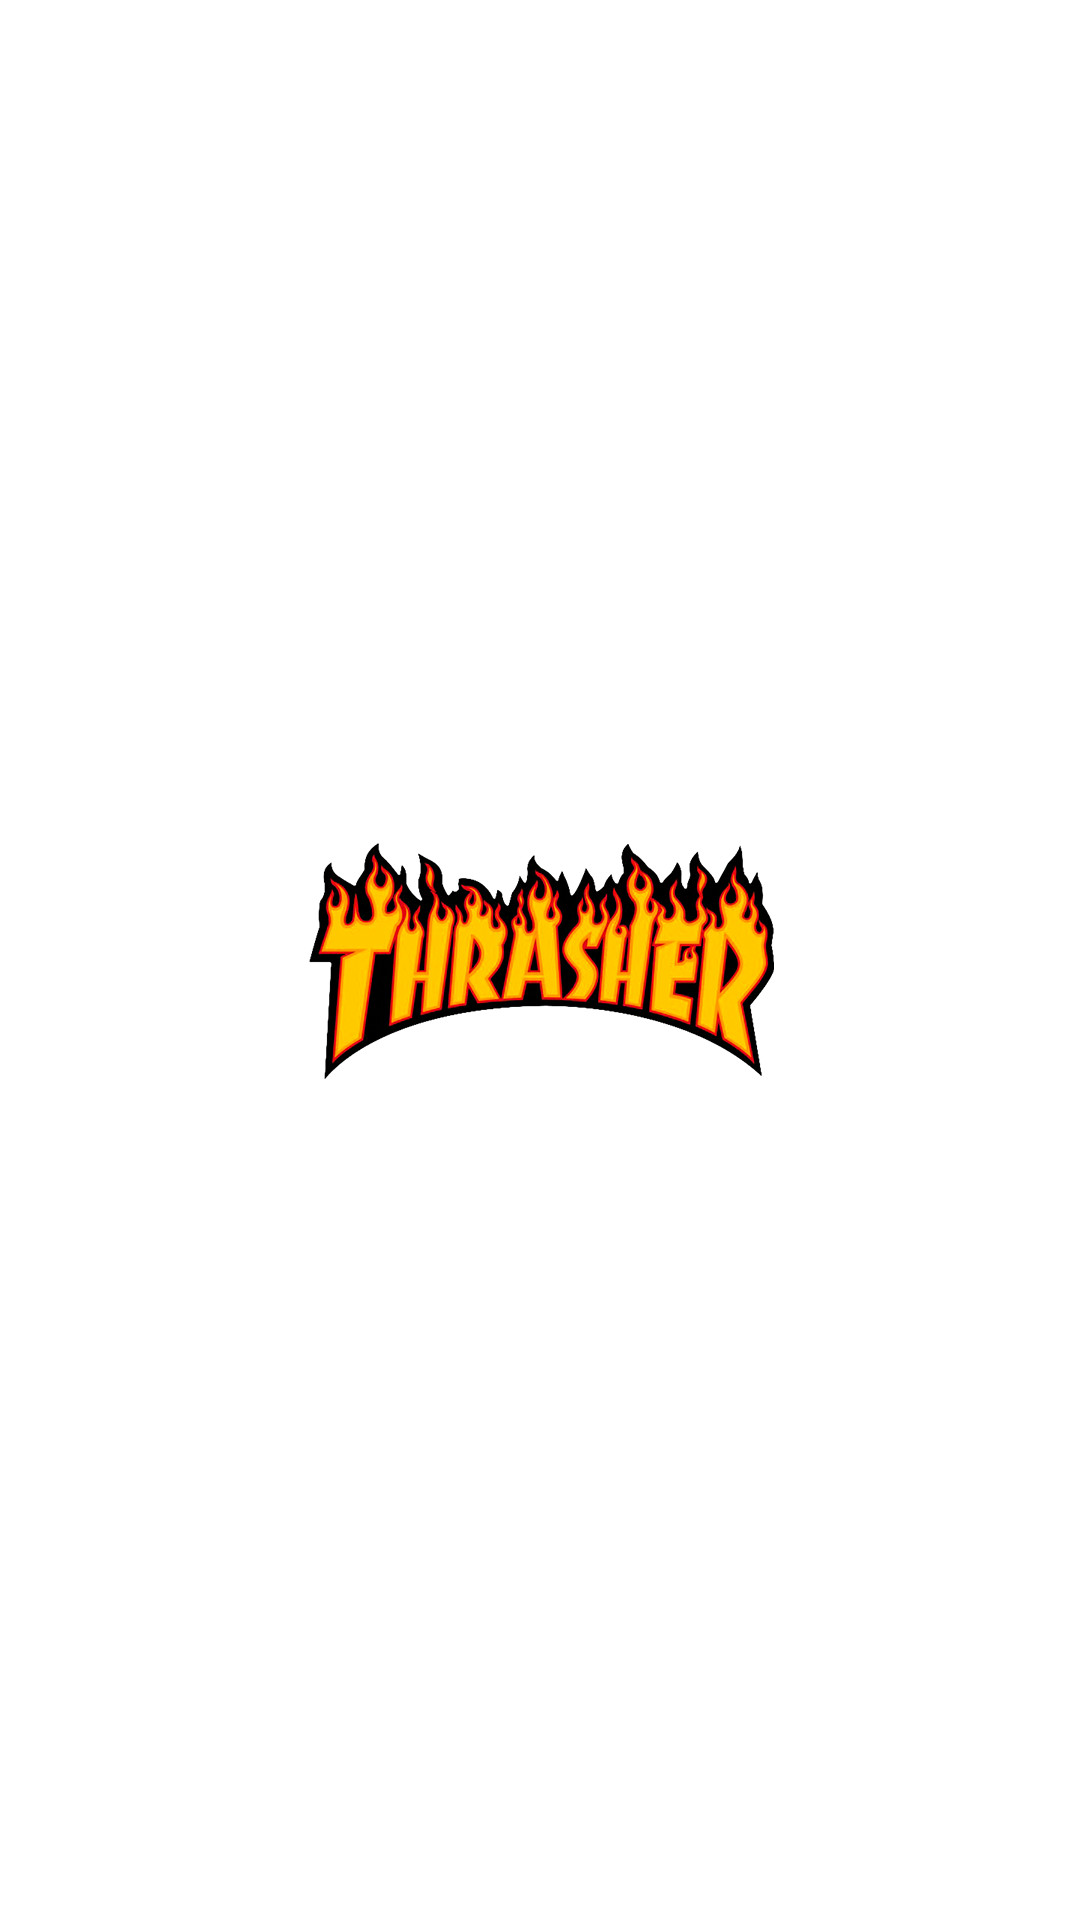 Thrasher Wallpaper Iphone 74 Images